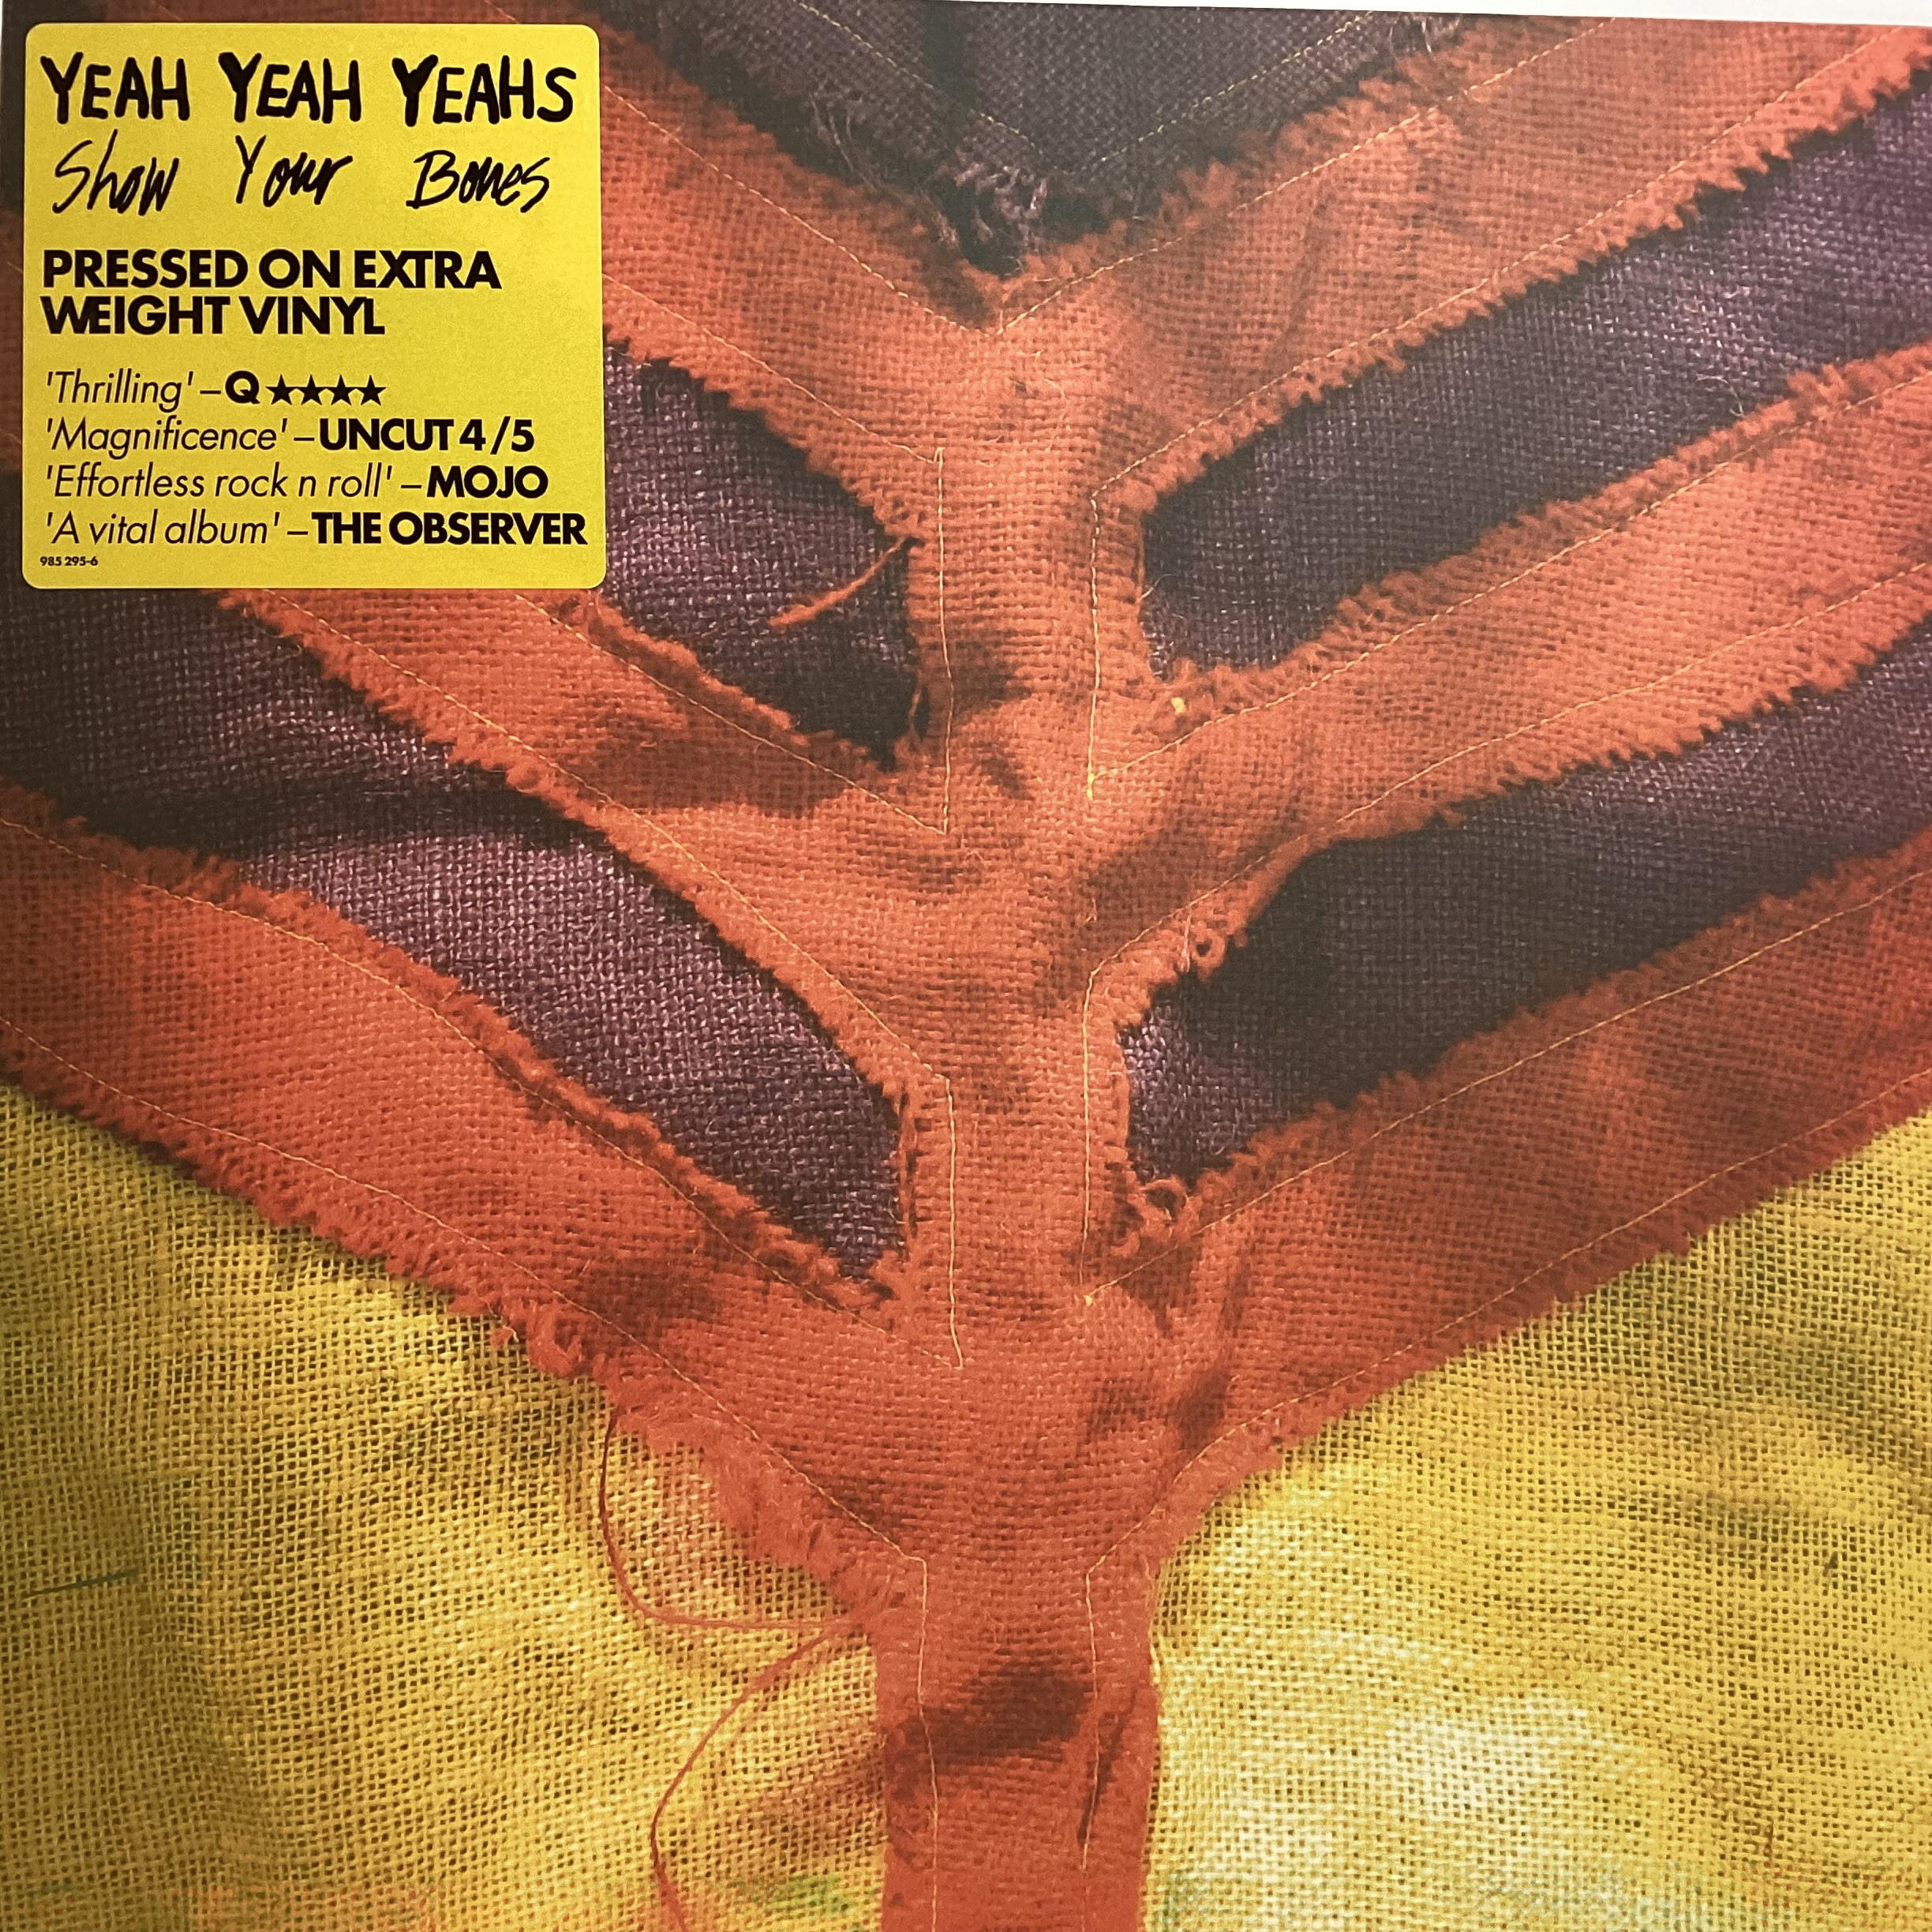 YEAH YEAH YEAHS LP VINYL RECORD “SHOW YOUR BONES”. 5his vinyl is in Ex condition and found here on